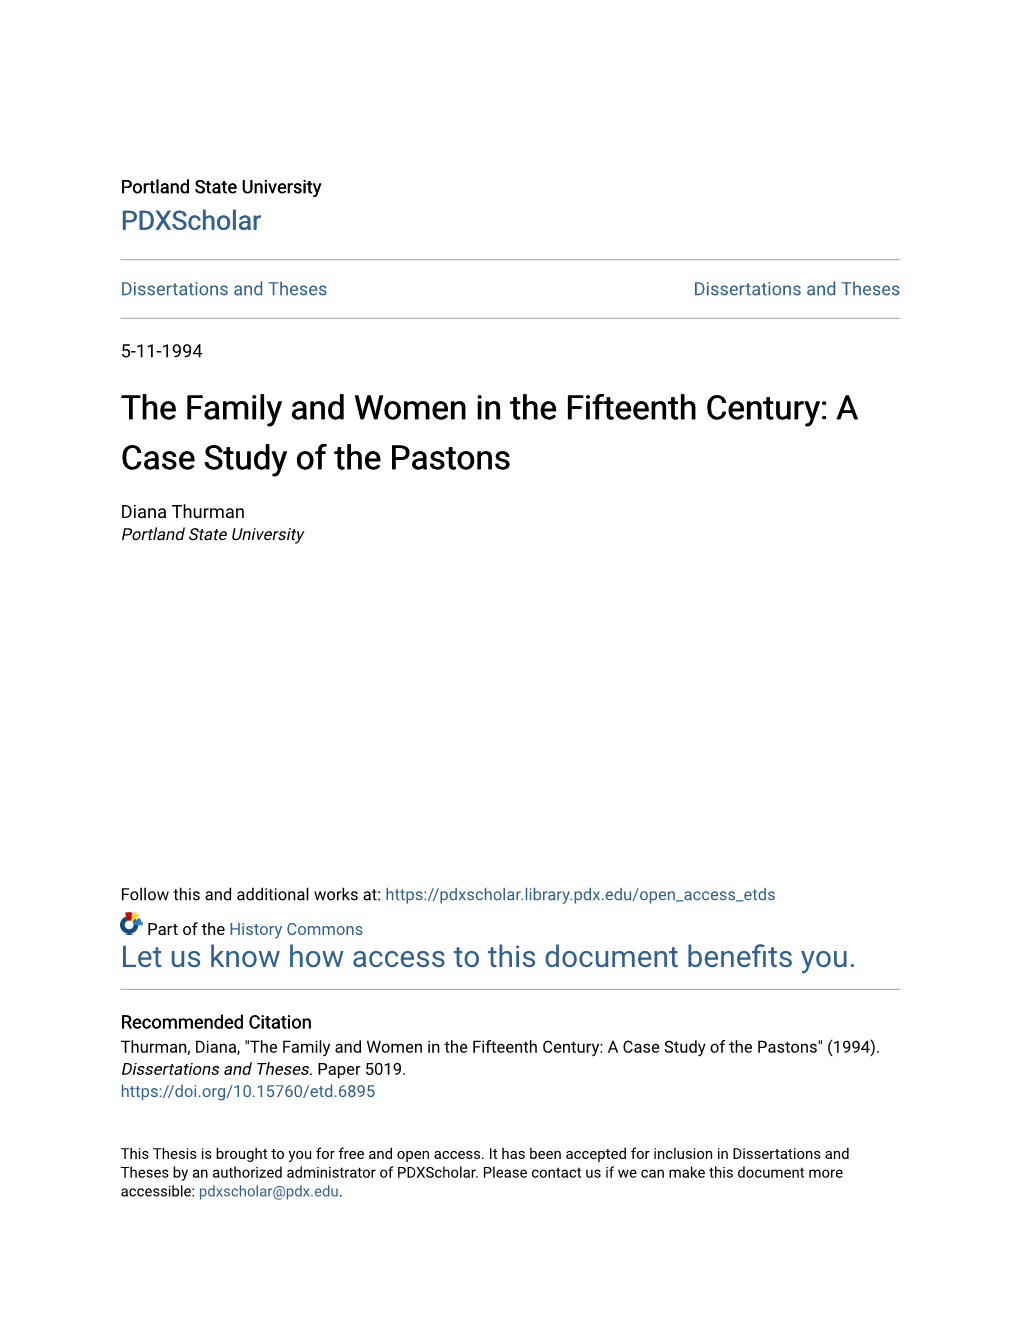 The Family and Women in the Fifteenth Century: a Case Study of the Pastons